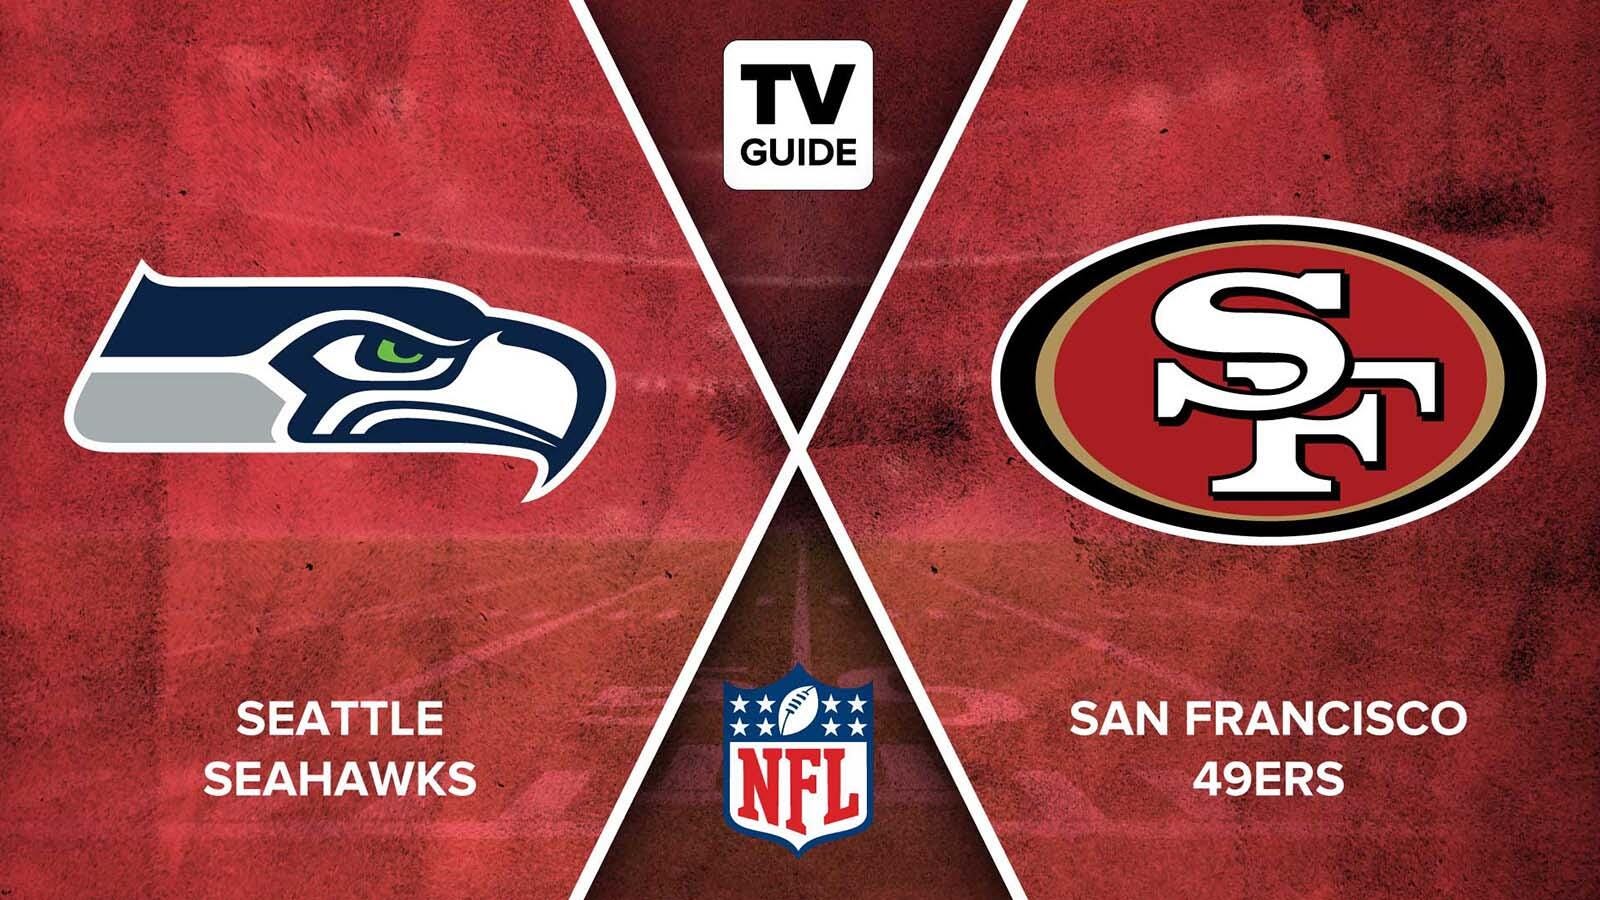 watch 49ers vs seahawks game online free